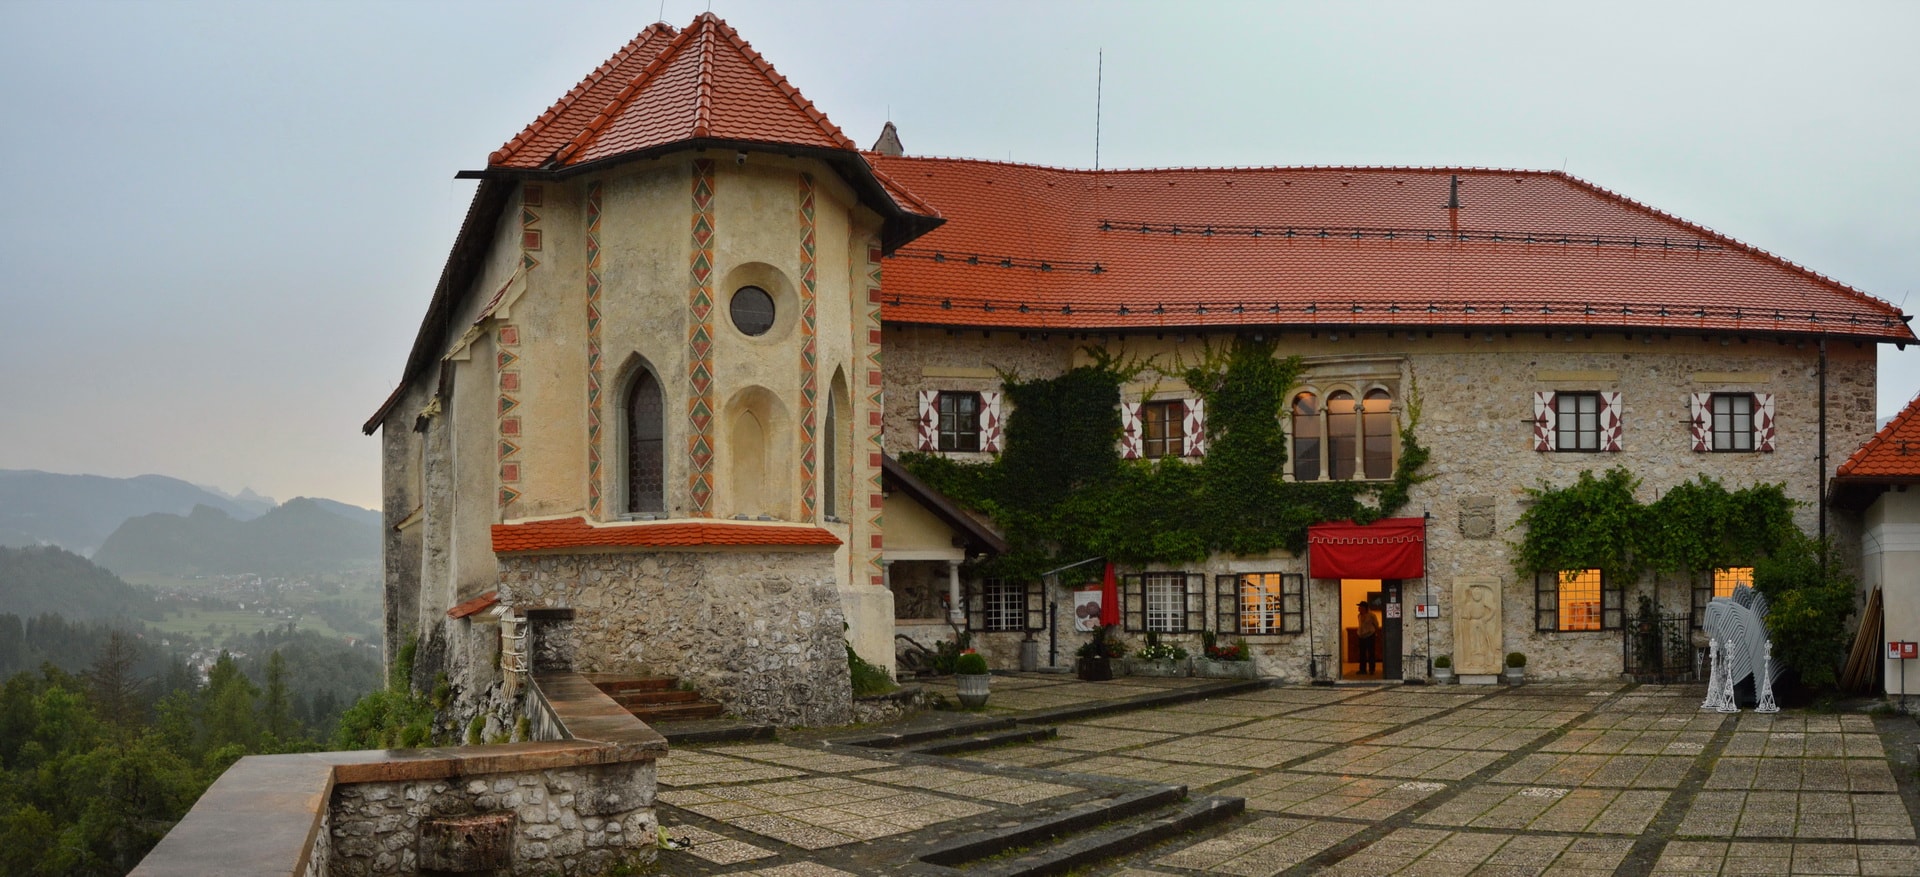 There is a museum and a restaurant in the upper courtyard of the Bled Castle